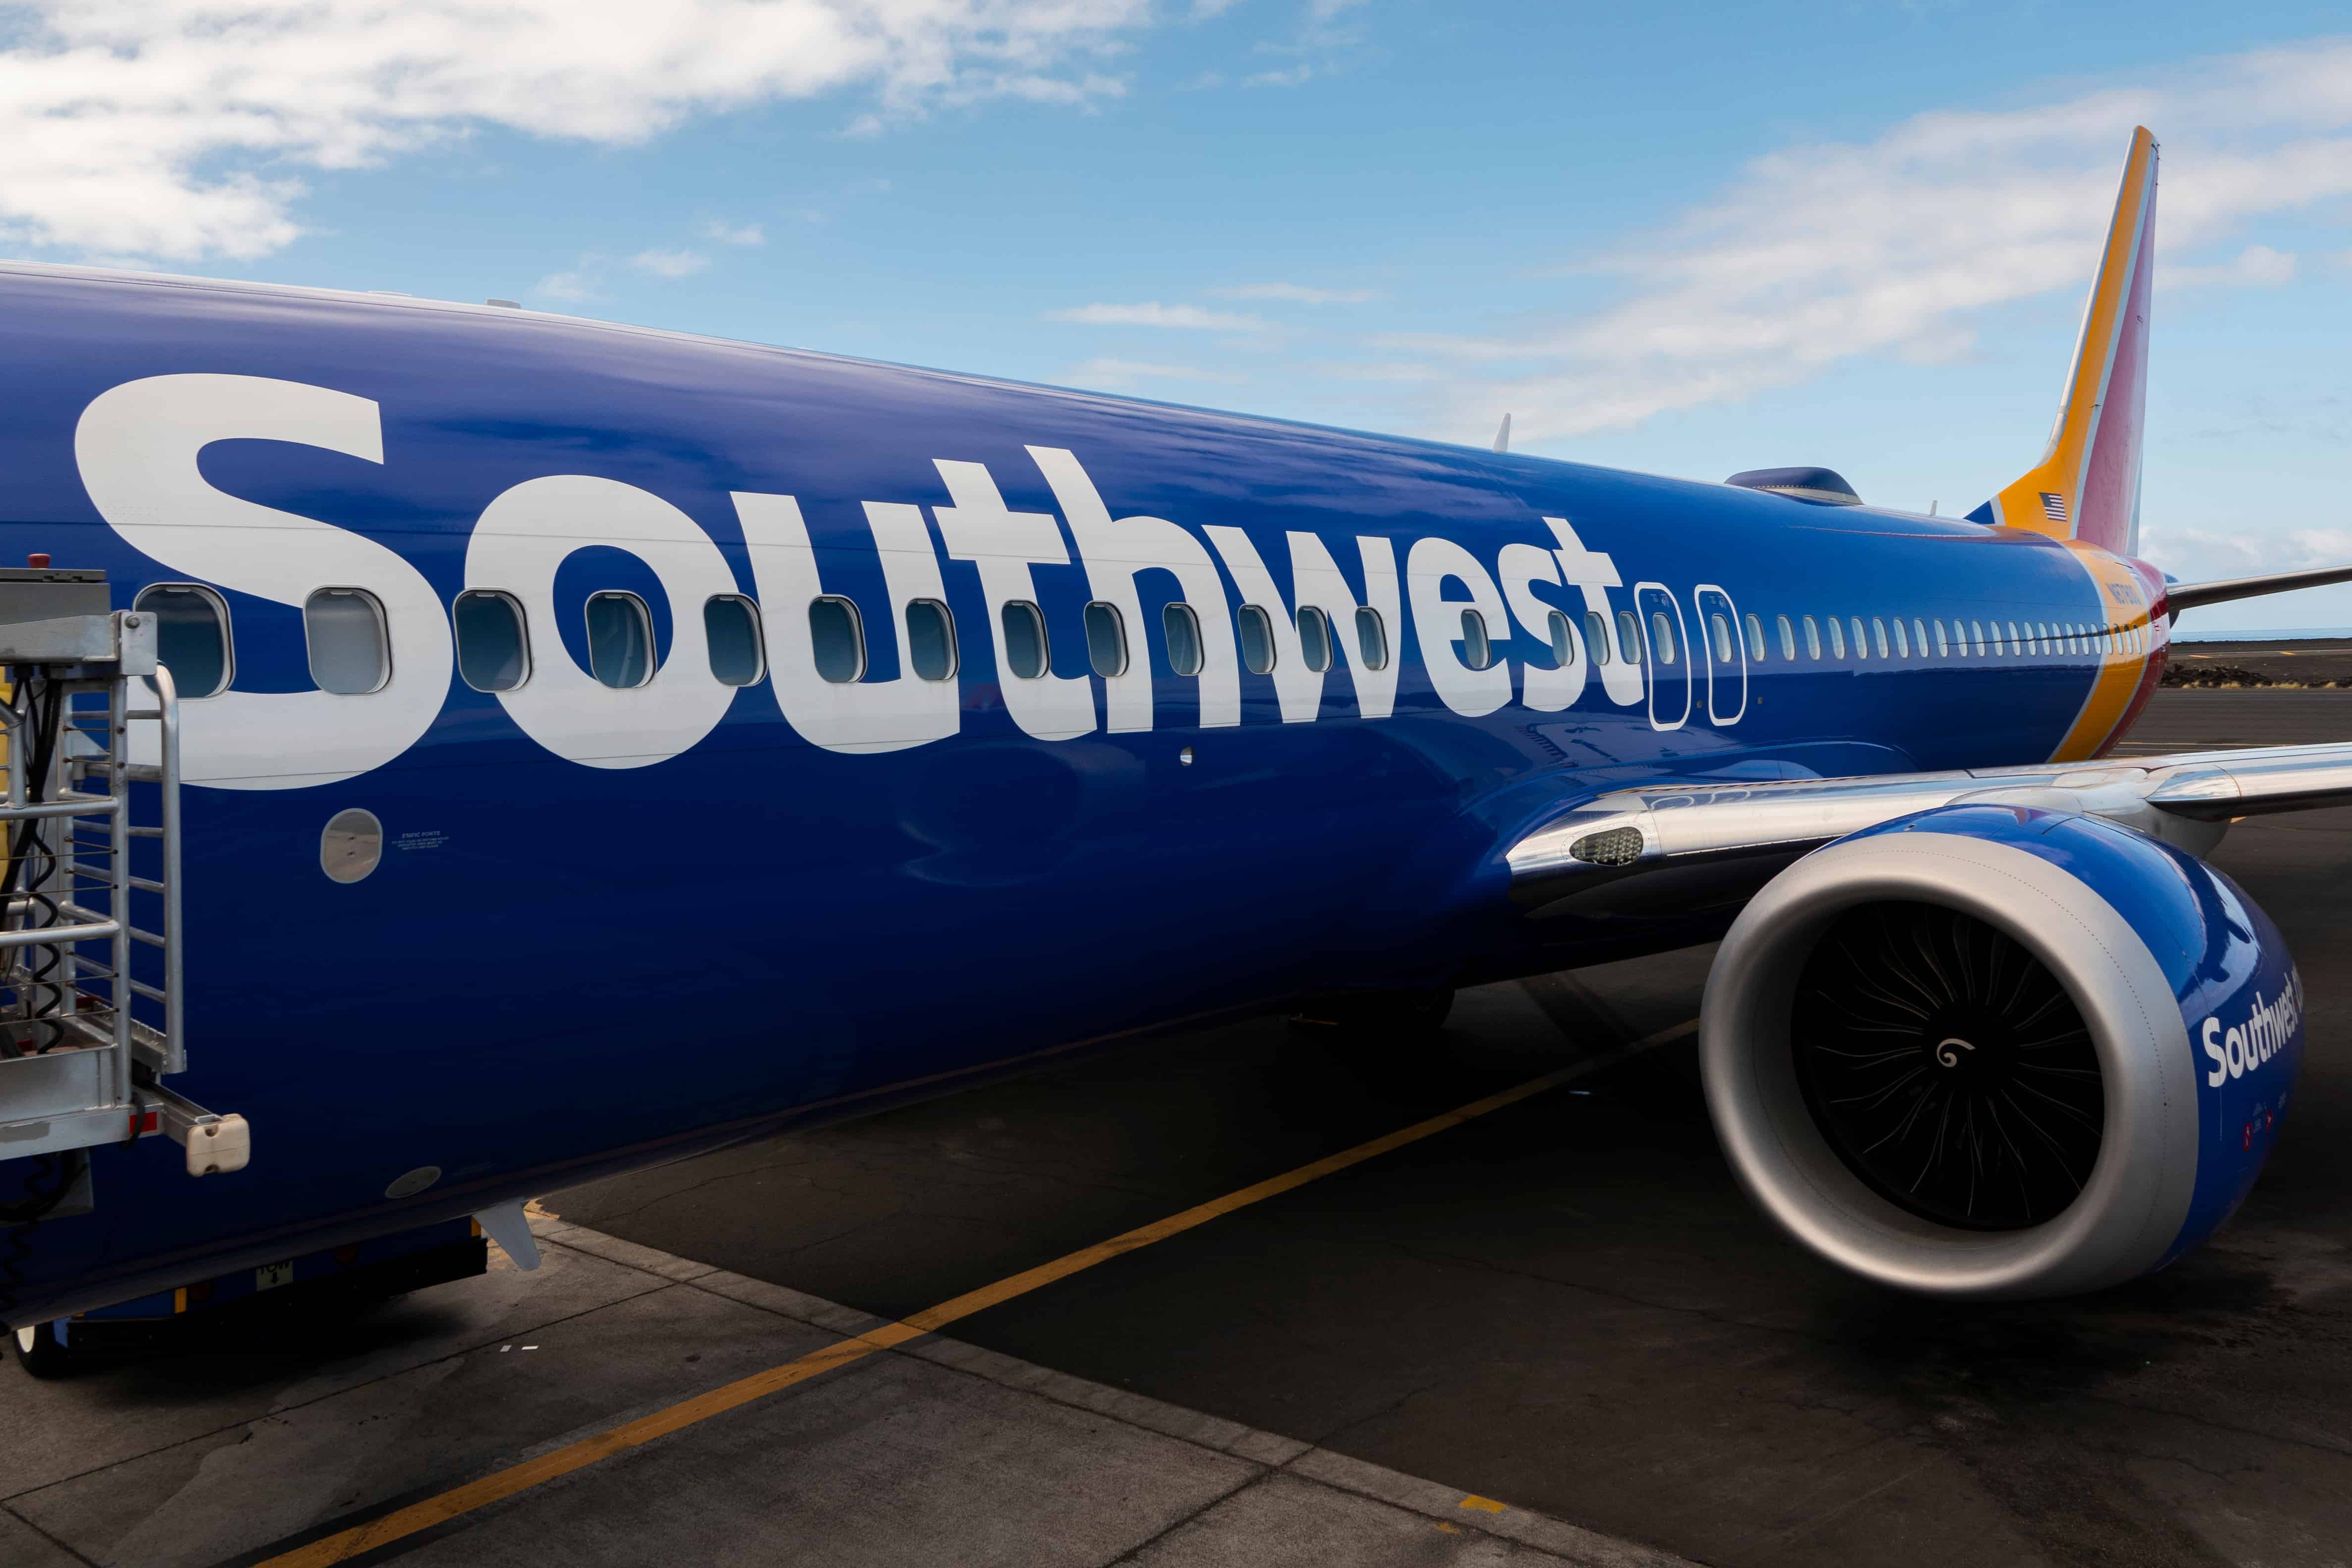 Boeing Southwest Airlines Aircraft Suffers Mid-Flight Incident